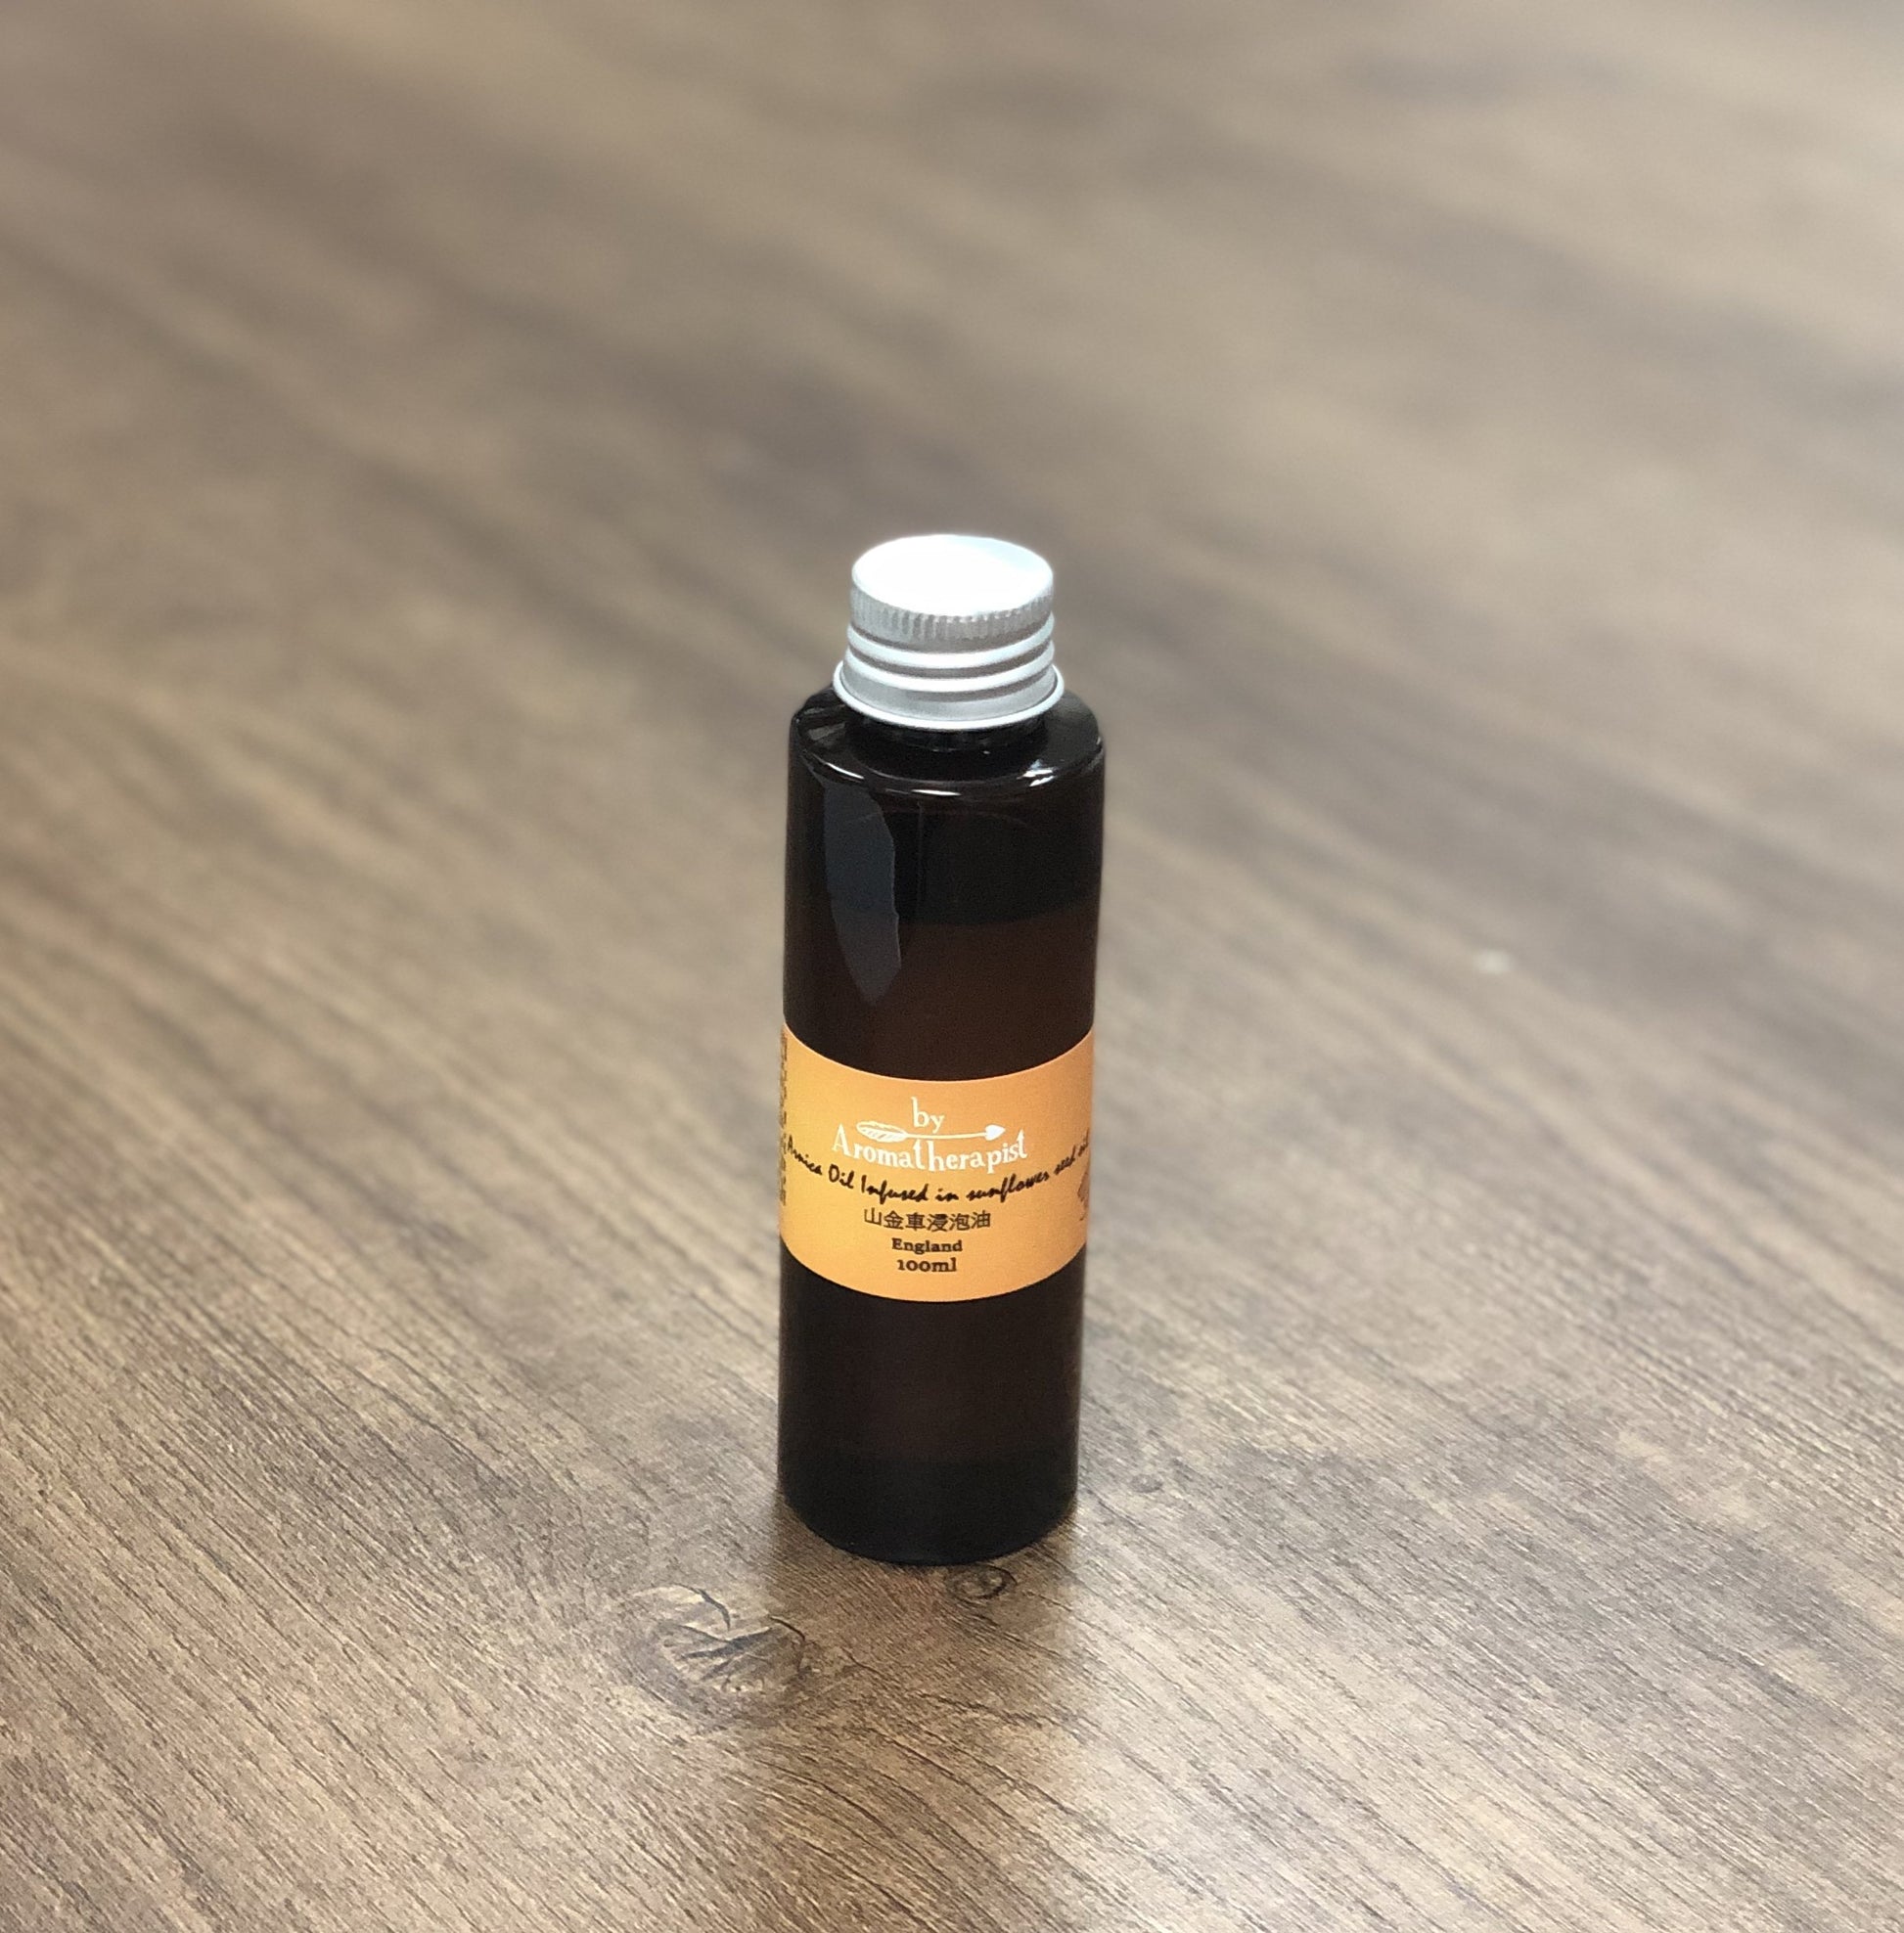 Arnica Oil Infused in Sunflower Seed Oil 山金車浸泡油 (100ml) - Life Science Publishing & Products Hong Kong and Asia